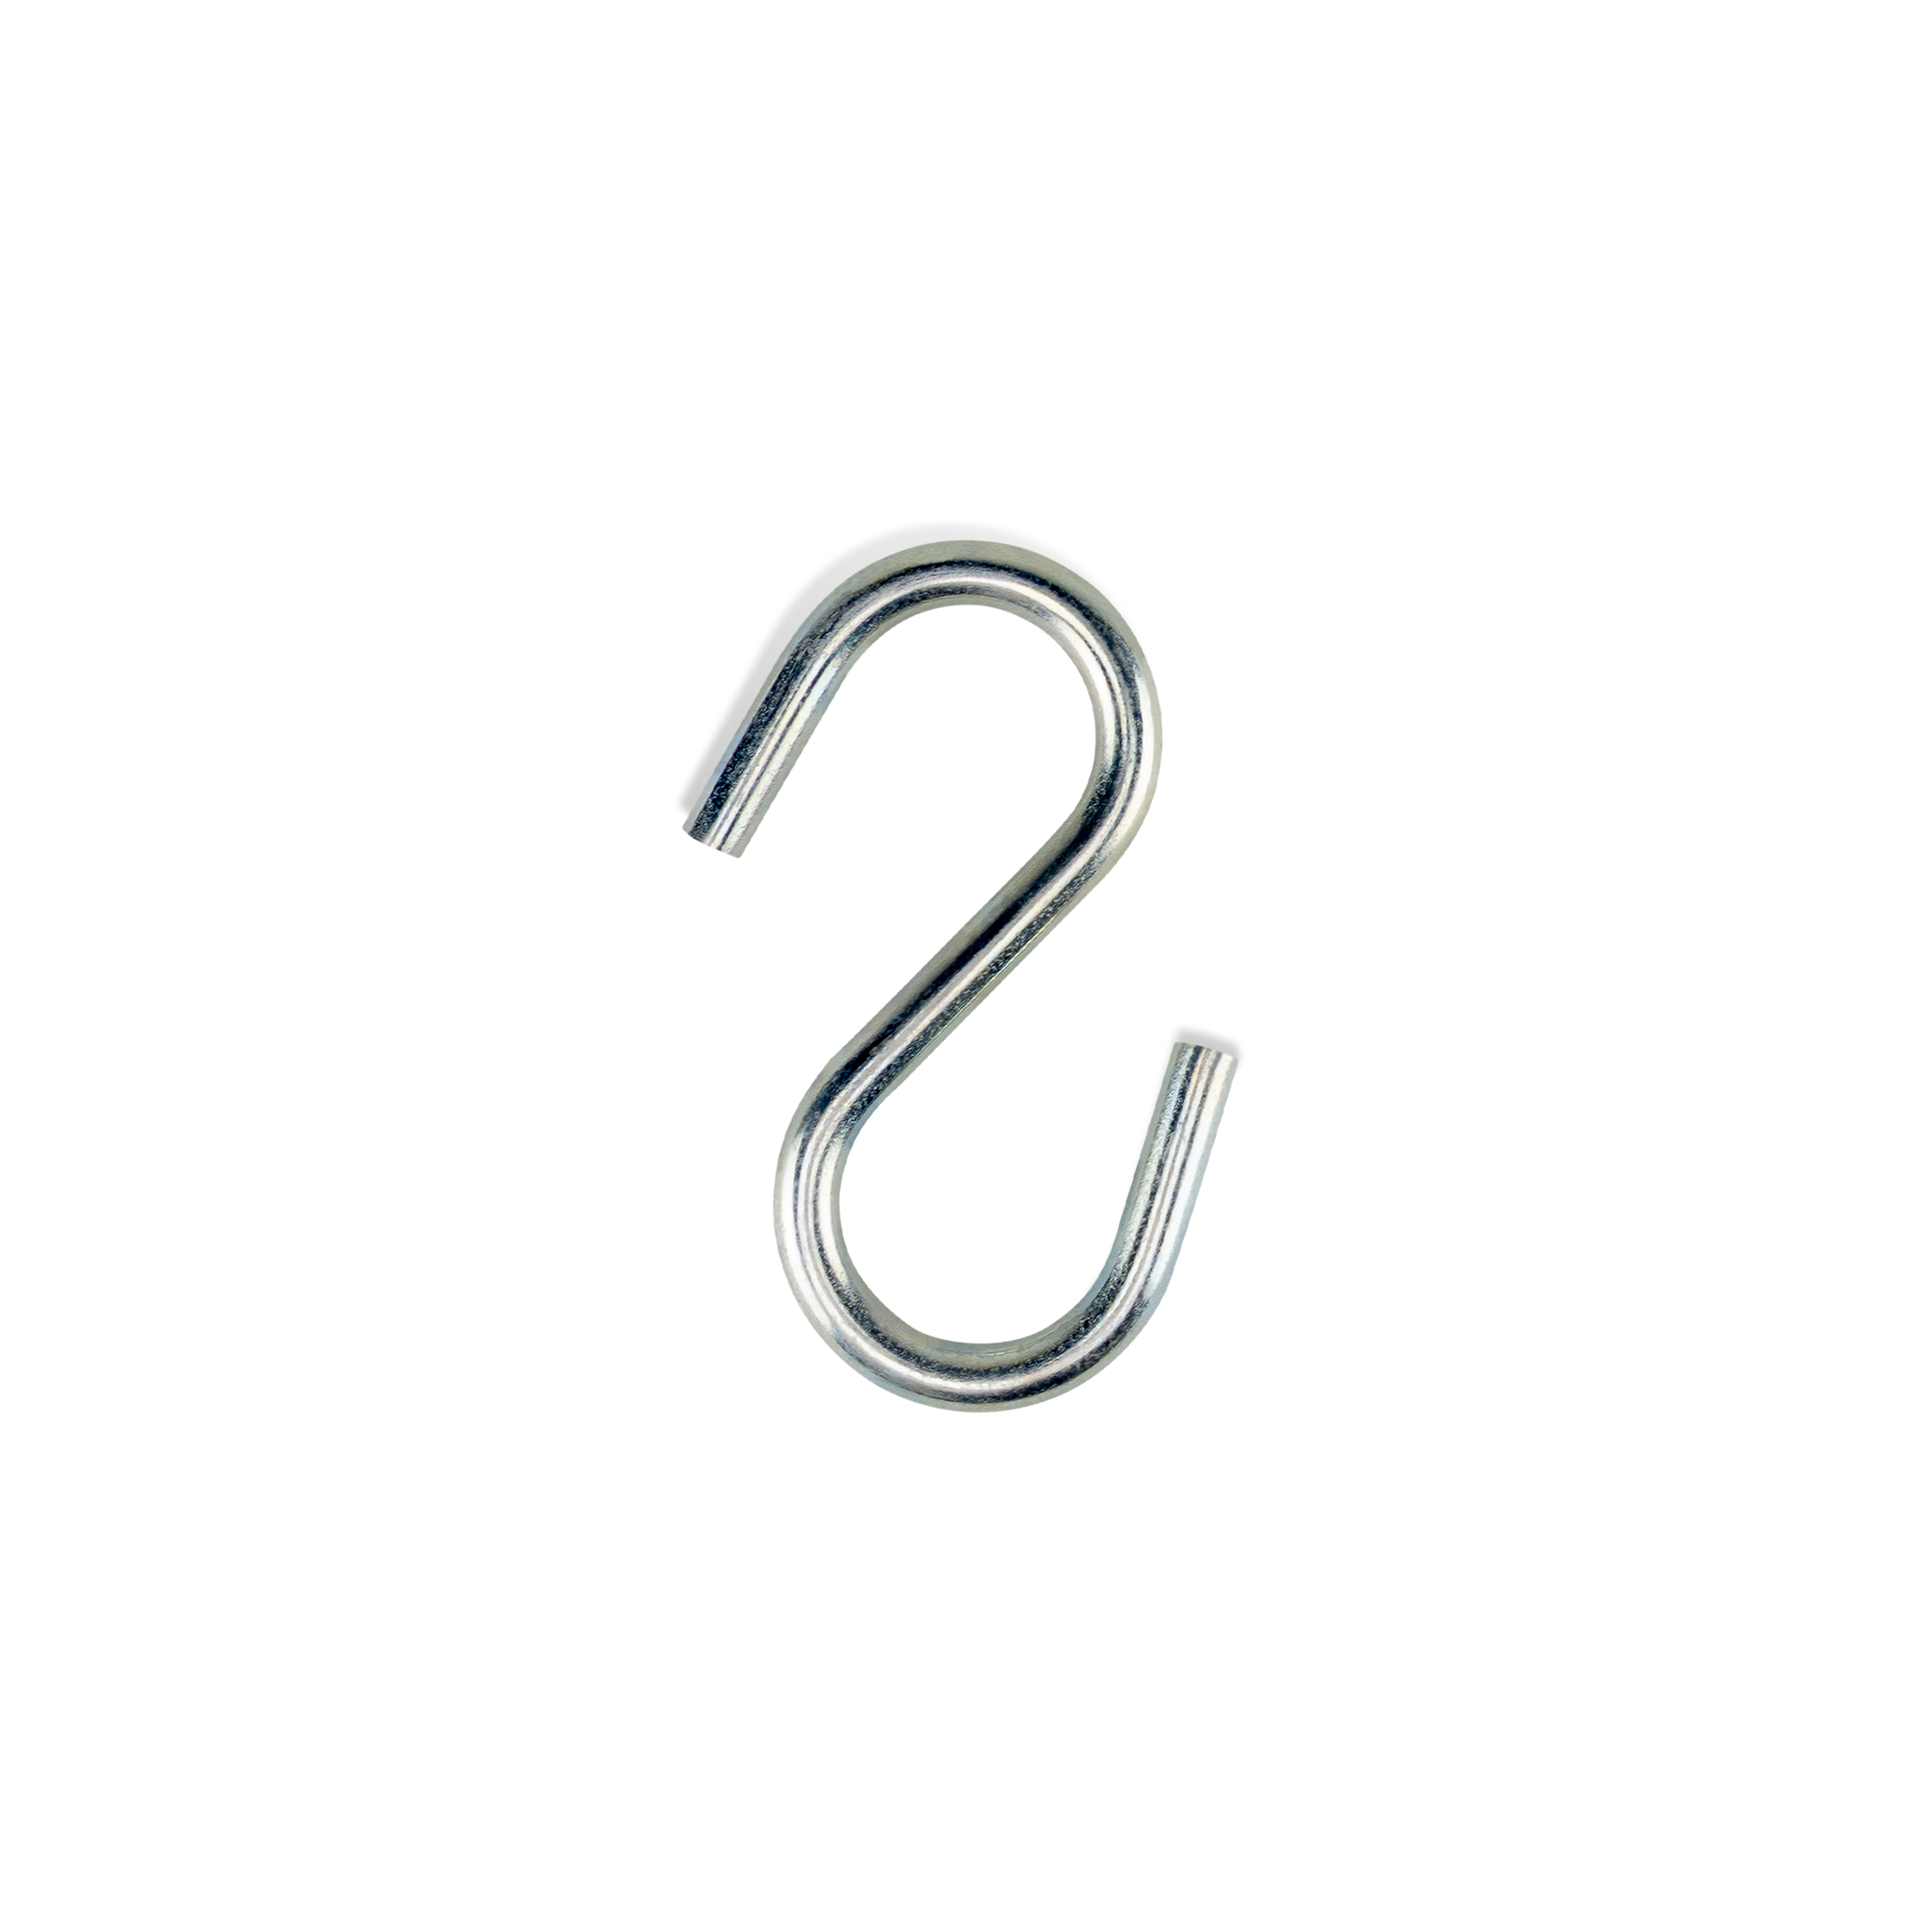 H140 - Large End 5/16 x 4 S-Hook - USA - Commercial - Jensen Swing  Products Inc